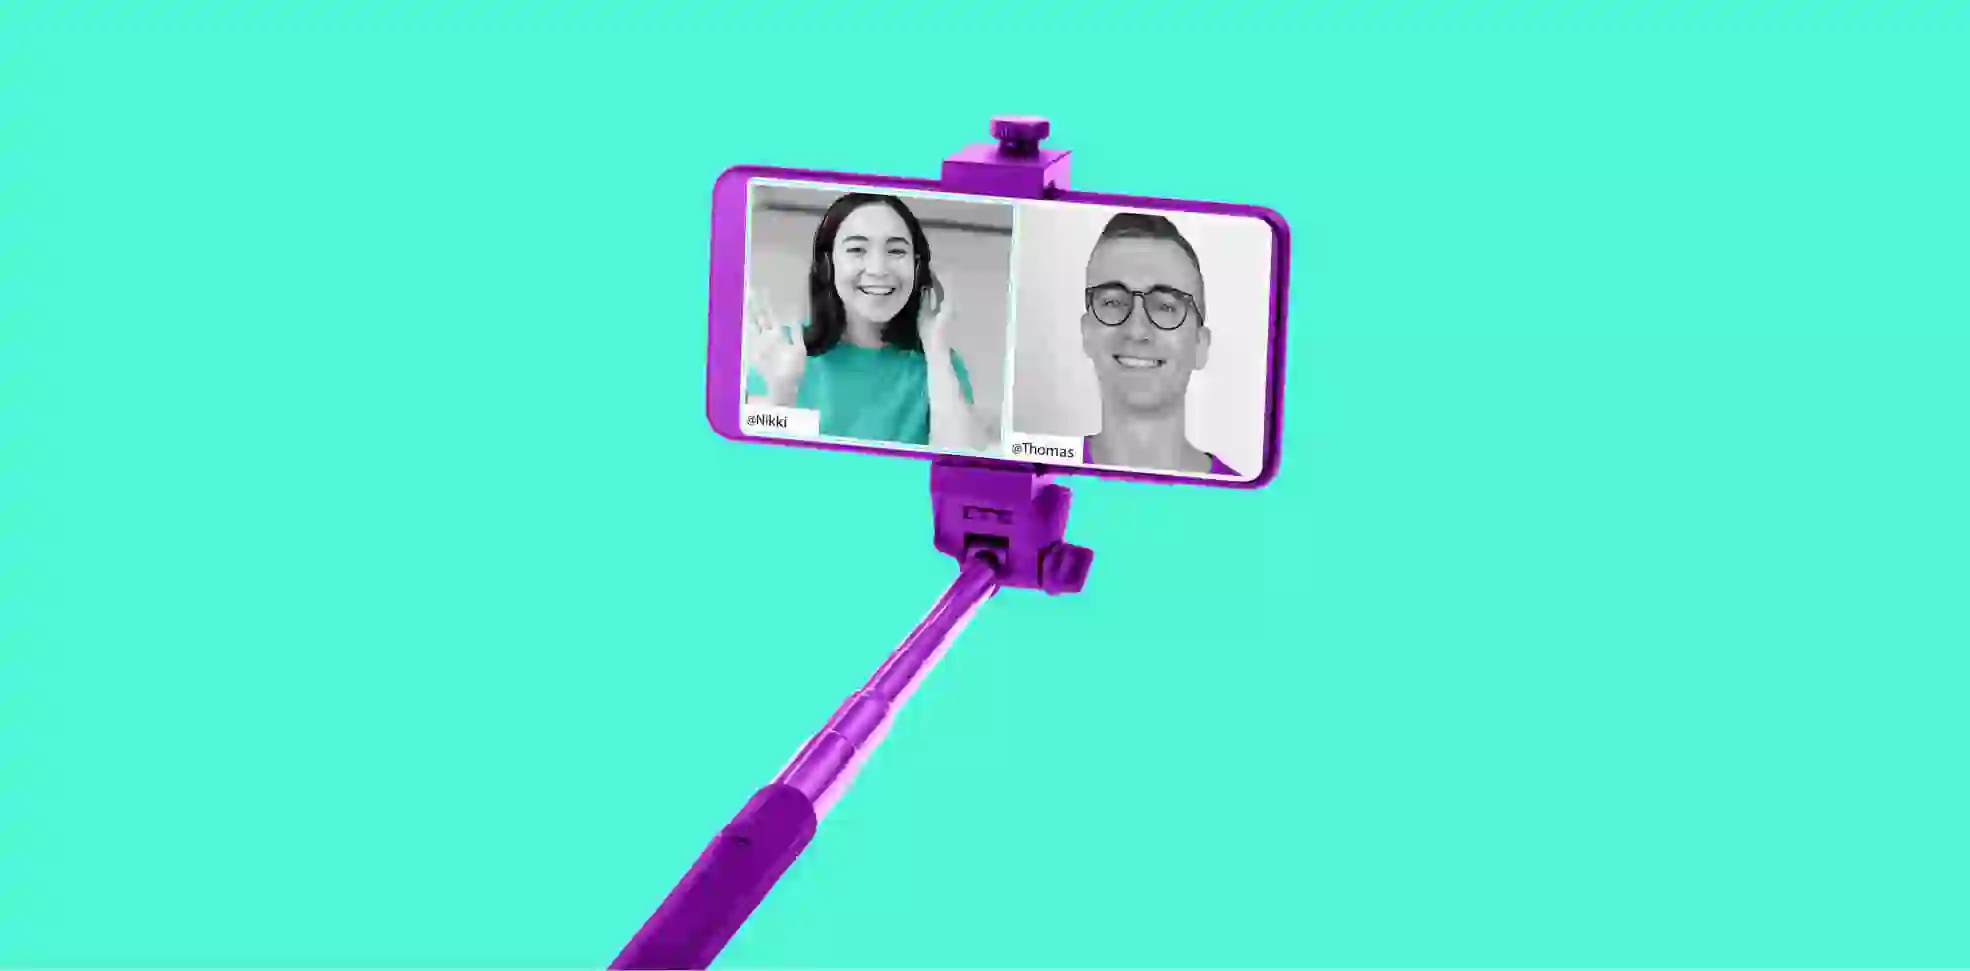 a purple phone on a selfie stick on a green background